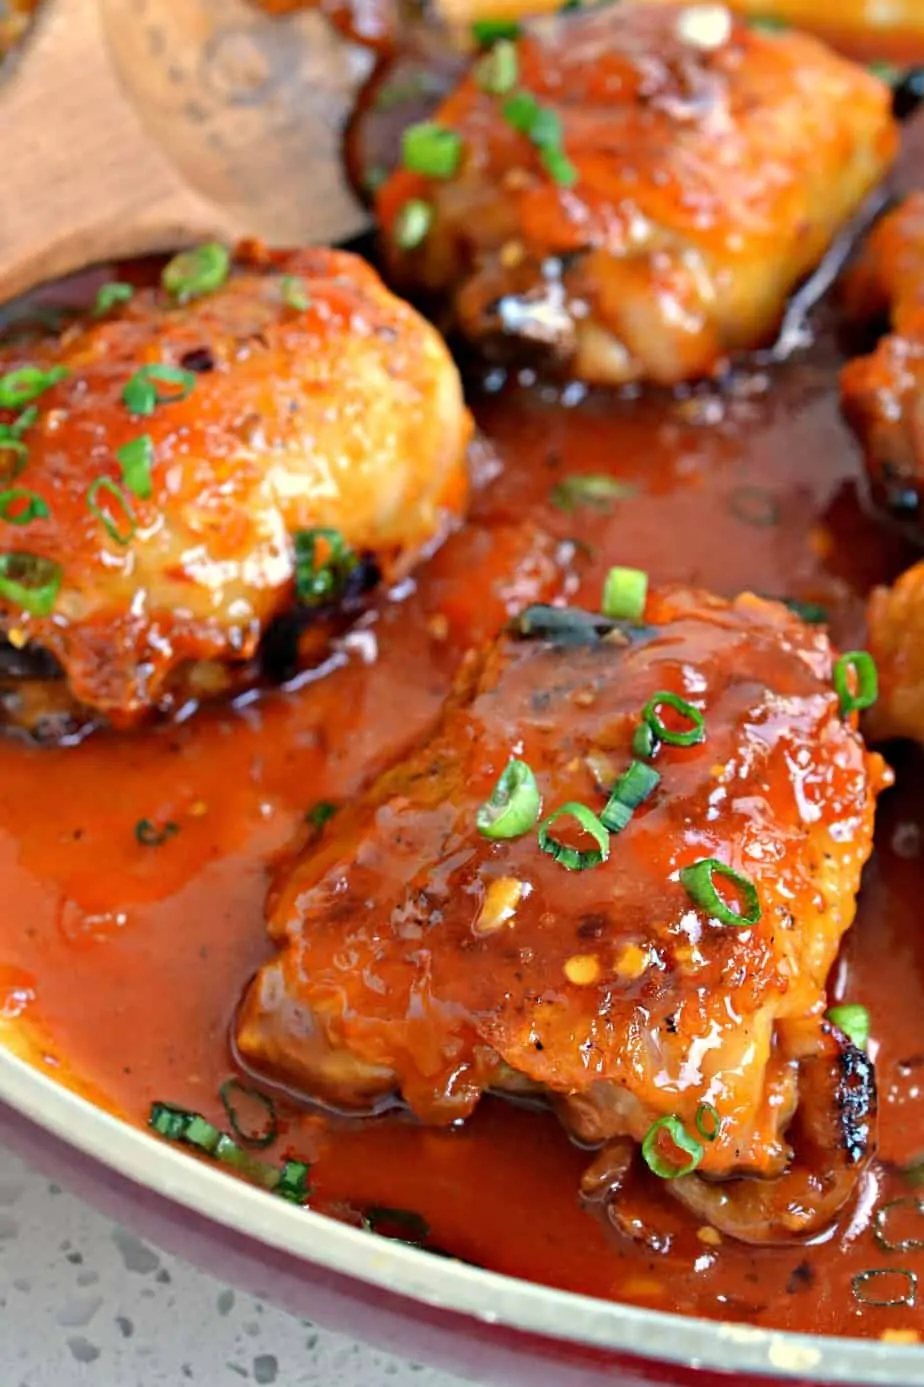 This Apricot Chicken recipe cooks up tender chicken thighs in an easy flavorful apricot sauce.